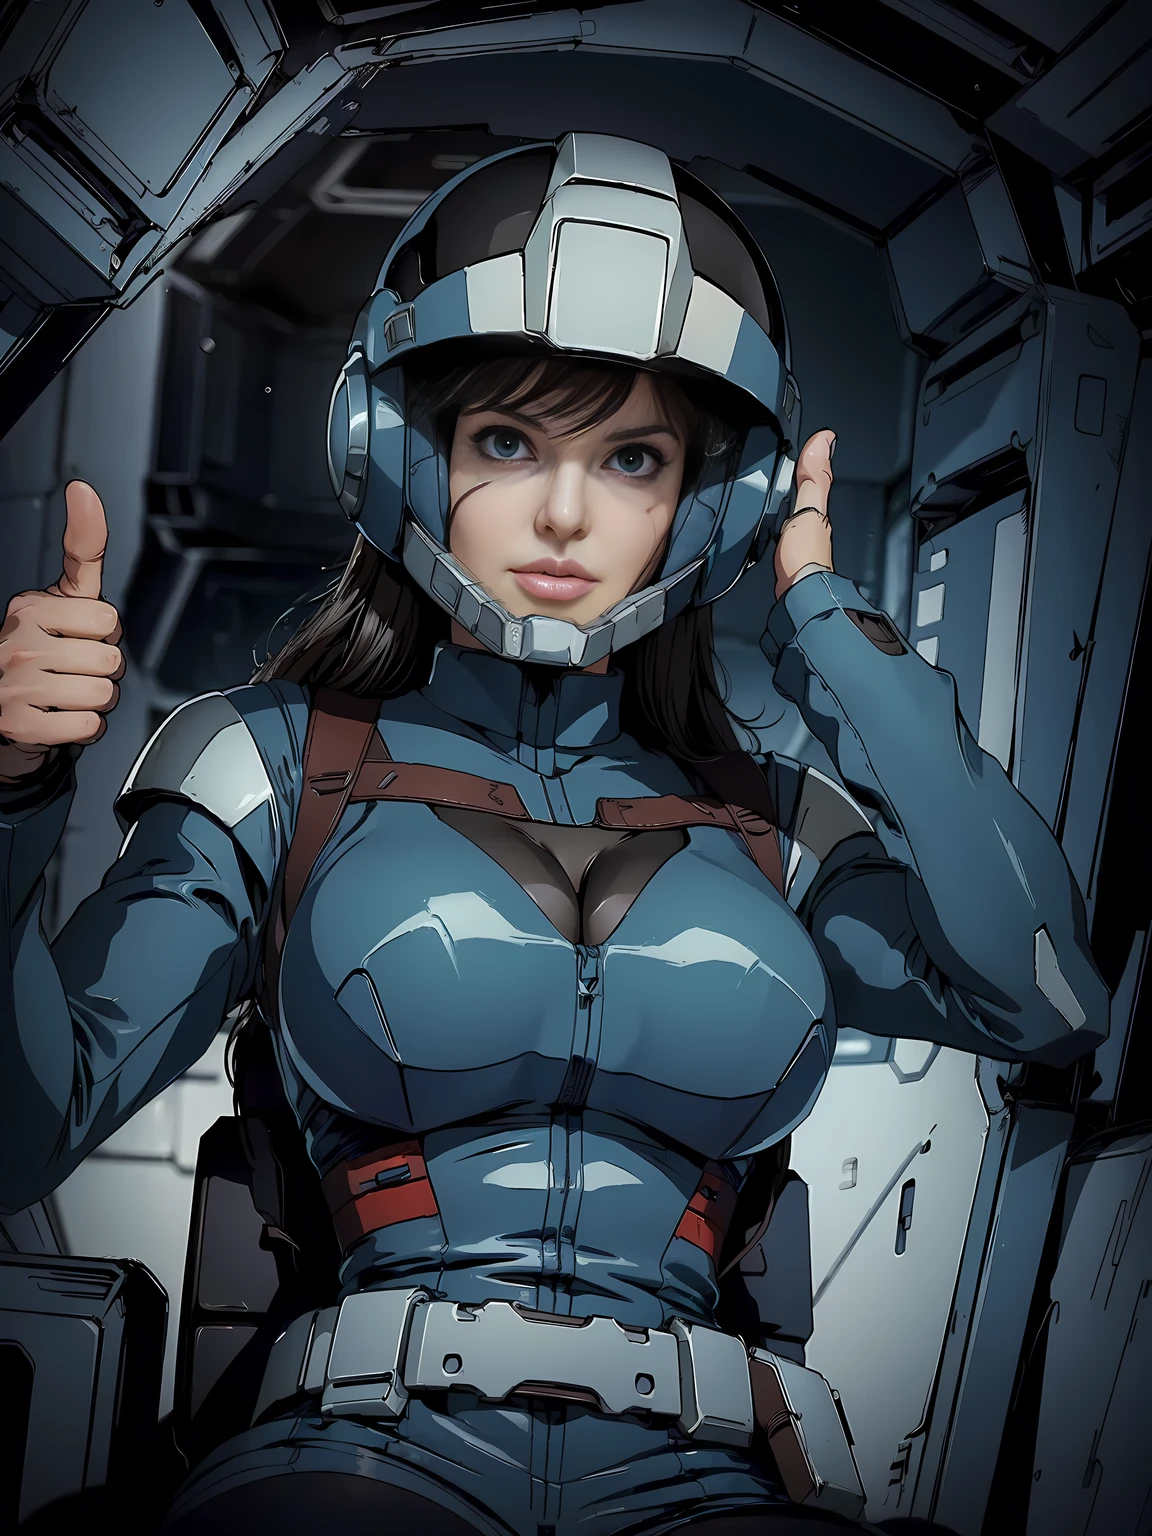 (((masterpiece,highest quality,In 8K,Super detailed,High resolution,anime style,absolutely))),A female Earth Federation Forces pilot sits in the cockpit of a mobile suit..,(alone:1.5),(Angelina jolie:1.5),(((front:1.4))),((seriously:1.5)),(((good:1.5))),(((The background is the cockpit of a dark mobile suit..:1.5))),((blur background:1.5)),(Wearing a pilot suit:1.5),((Wearing a full-face helmet:1.5)),(Beautiful woman:1.5),(Detailed facial depiction:1.5),(big breasts:1.3),(wallpaper:1.5),(from below:1.5)